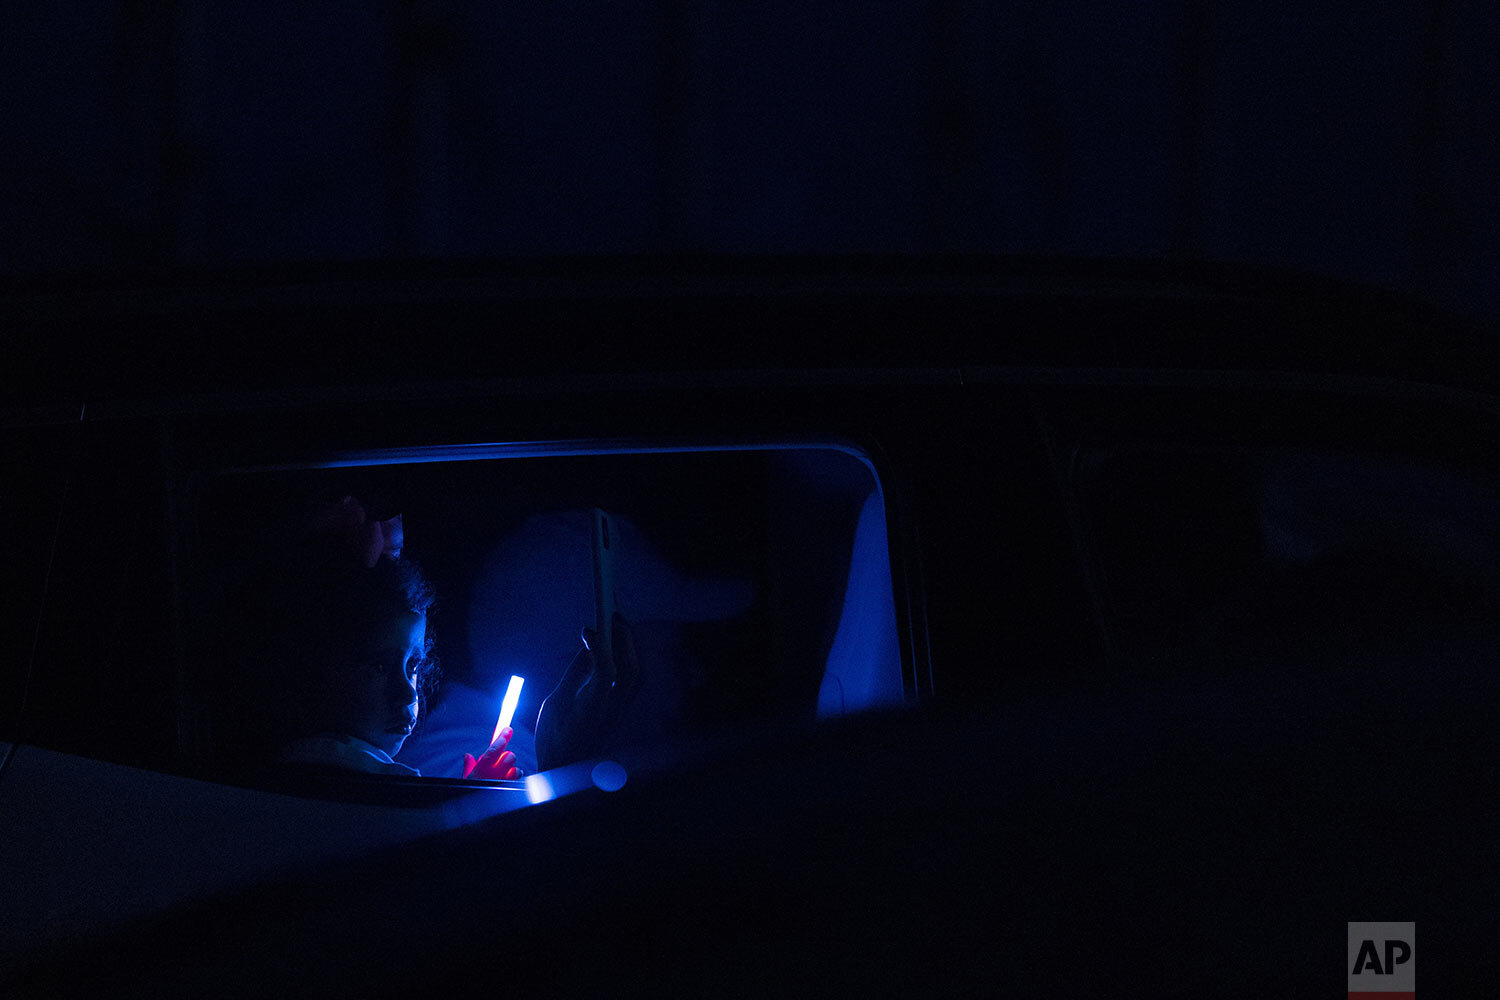  A girl holds a light stick inside her car as she watches the Estoril Circus drive-in show in Itaguai, in greater Rio de Janeiro, Brazil, July 18, 2020. (AP Photo/Leo Correa) 